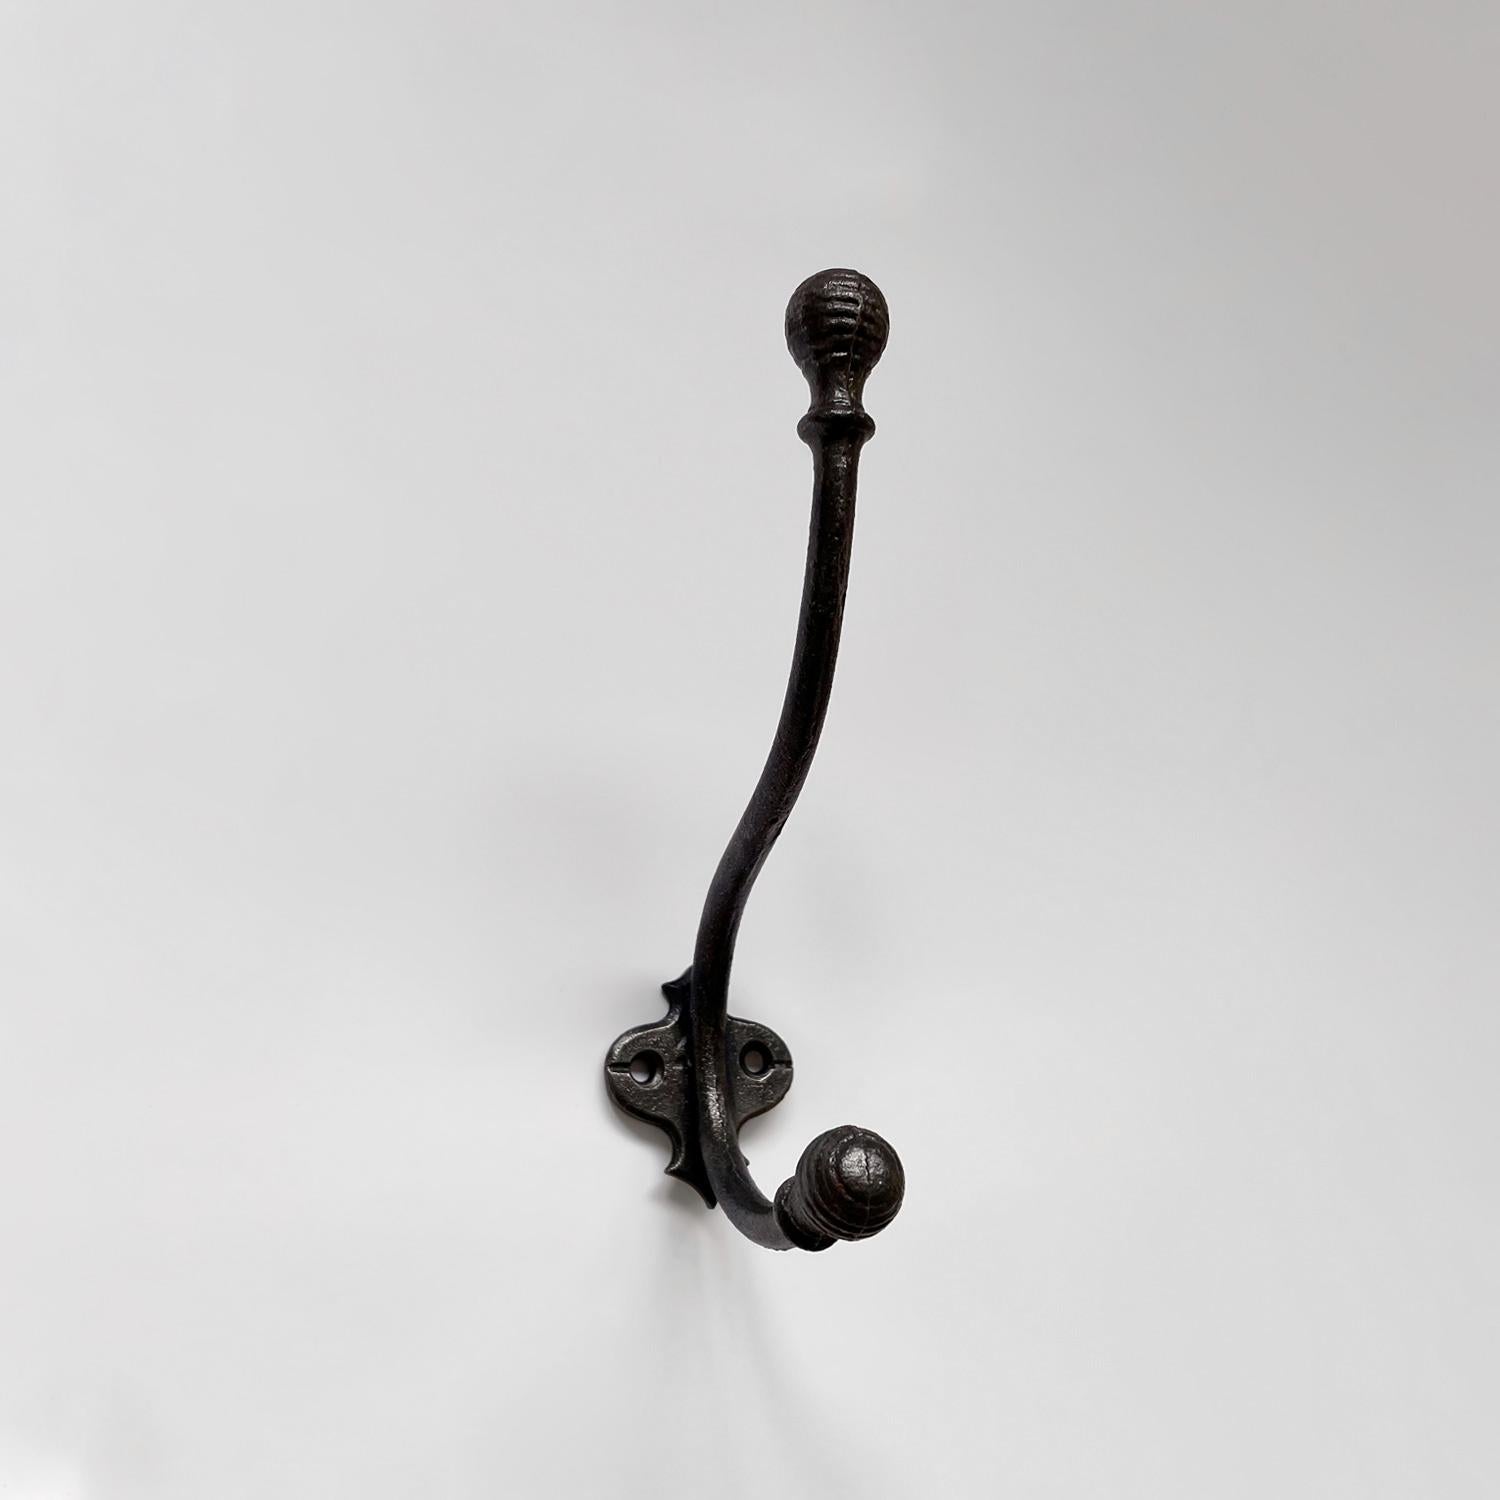 French cast iron double wall hook
France, mid century
Petite in its construction yet charming nonetheless
Curved iron J hook finished with two etched ball hooks providing upper and lower storage
Wall mounted hook is supported by a single bracket